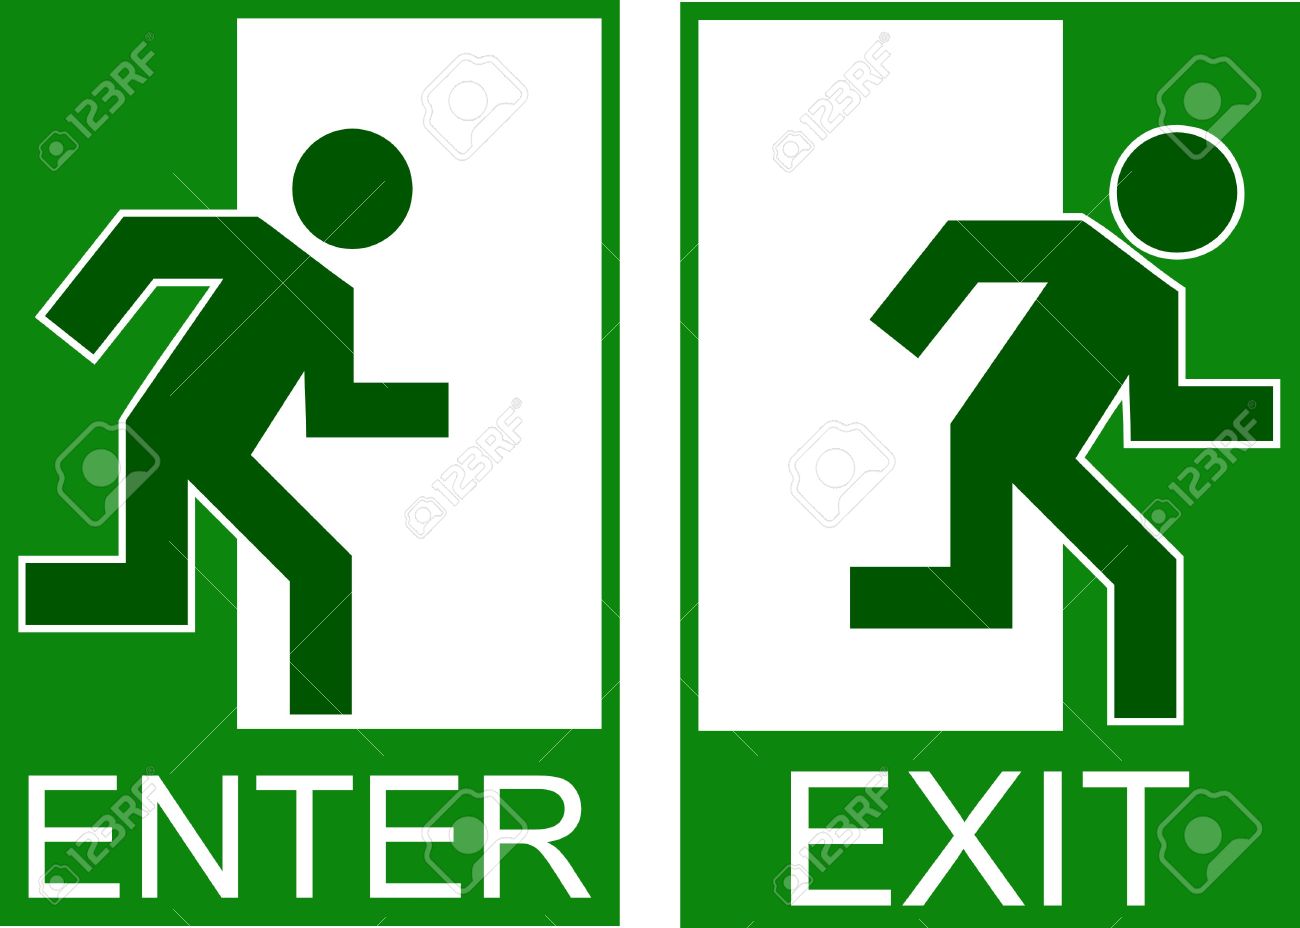 enter and exit sign post dire